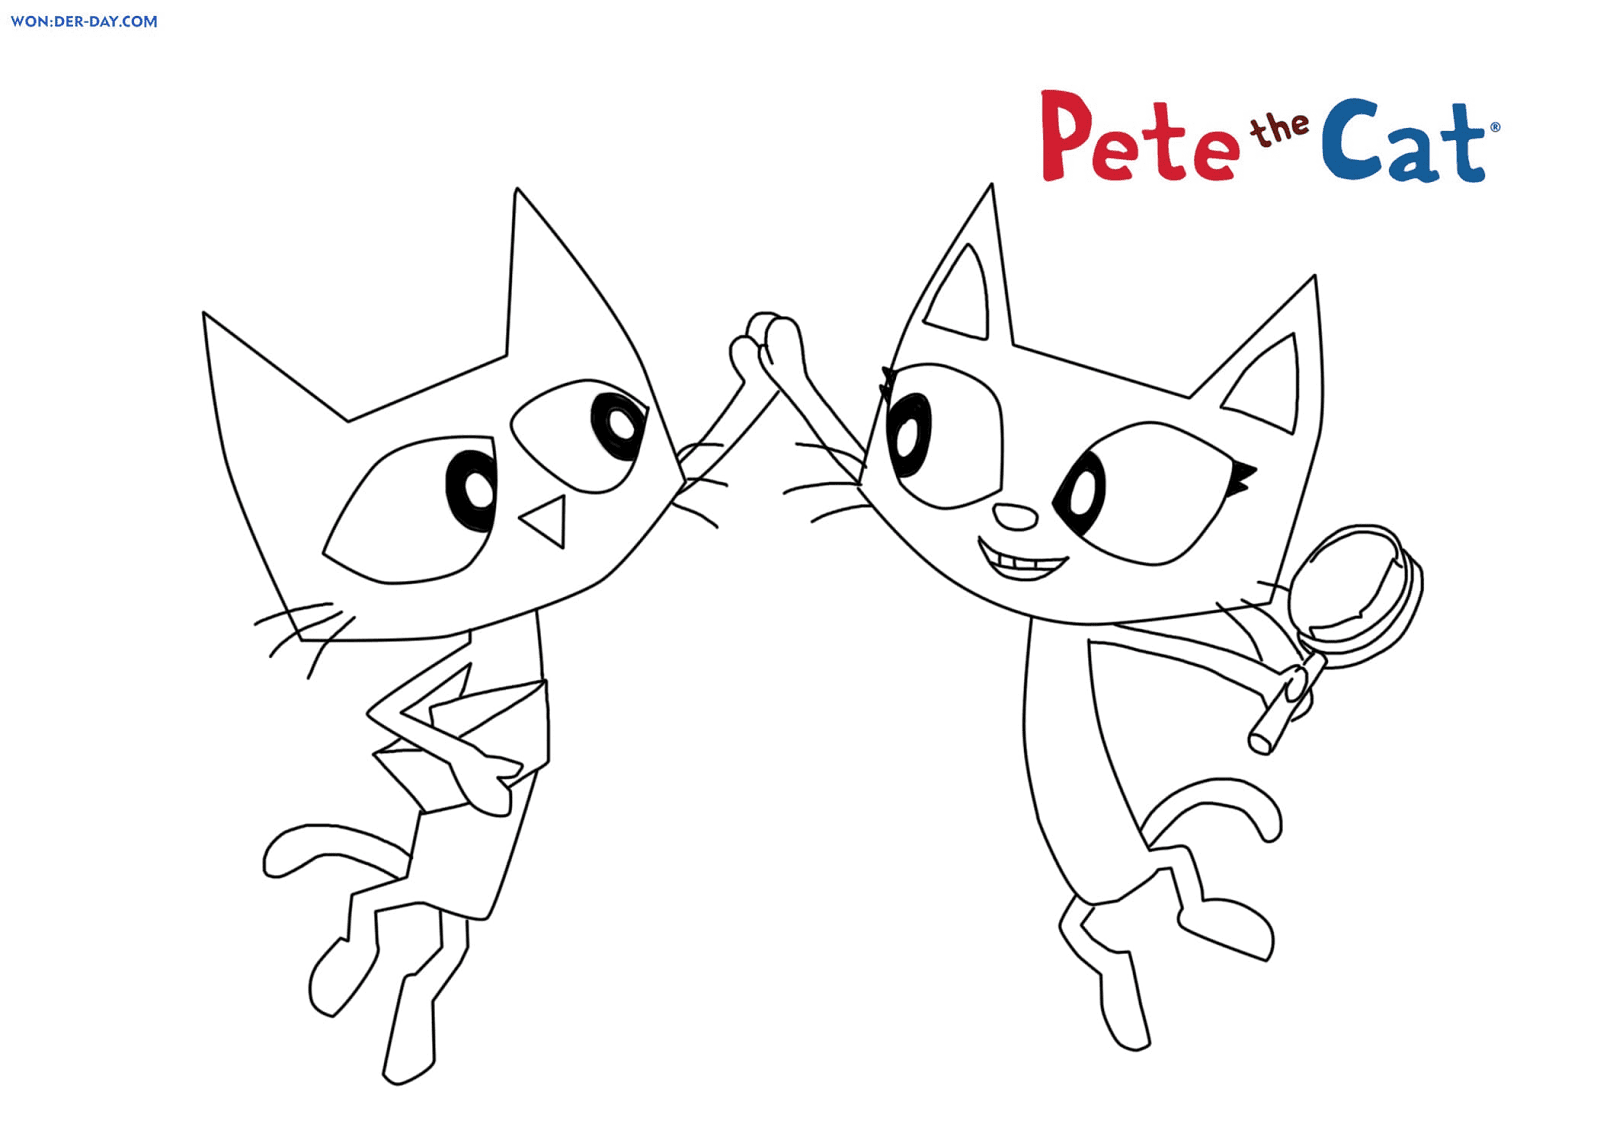 Pete the cat and Callie Coloring Page